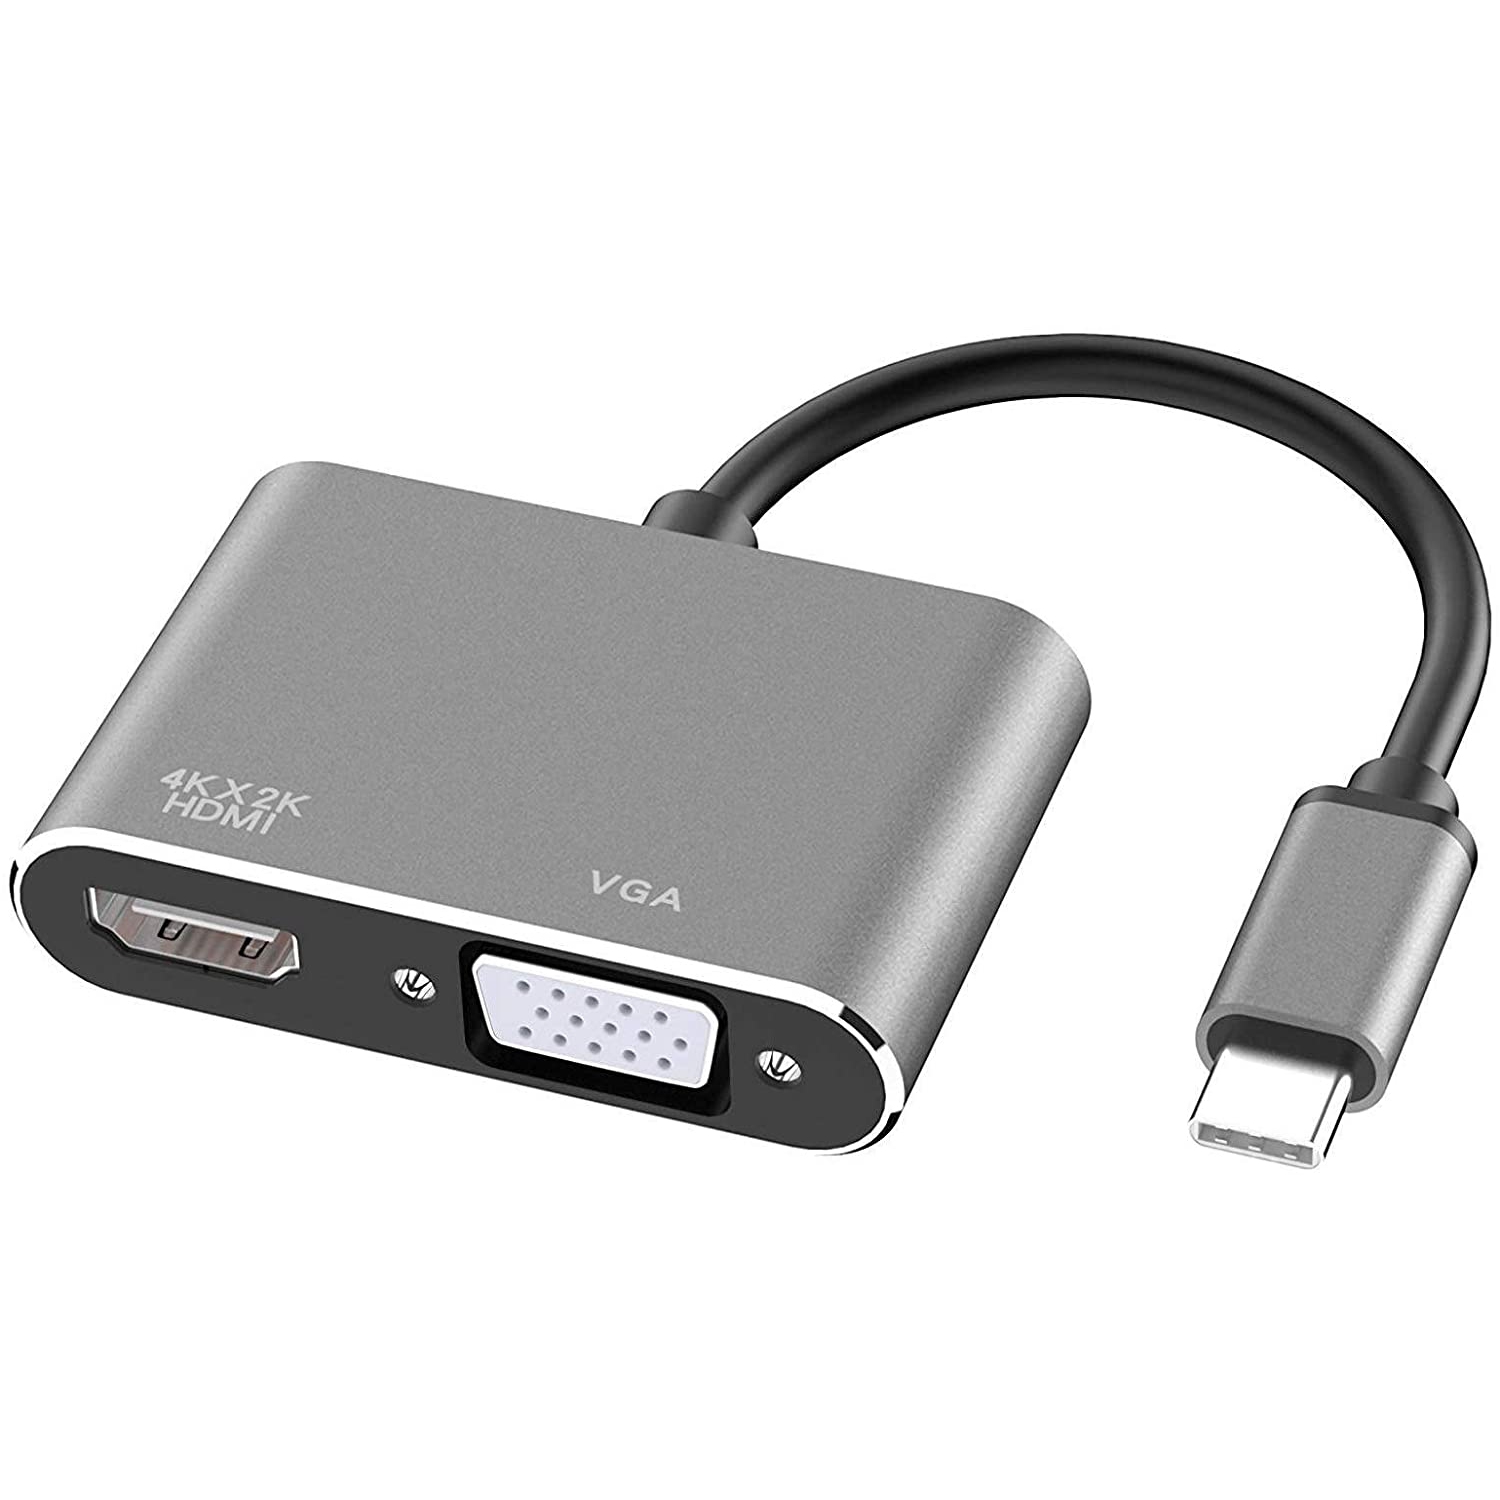 USB C to 4K HDMI VGA Adapter, 2-in-1 USB Type C to Dual VGA HDMI Splitter Converter for Nintendo Switch/MacBook hdmi adapter Surface go, Dell XPS Samsung Galaxy S8/S9 - Metal